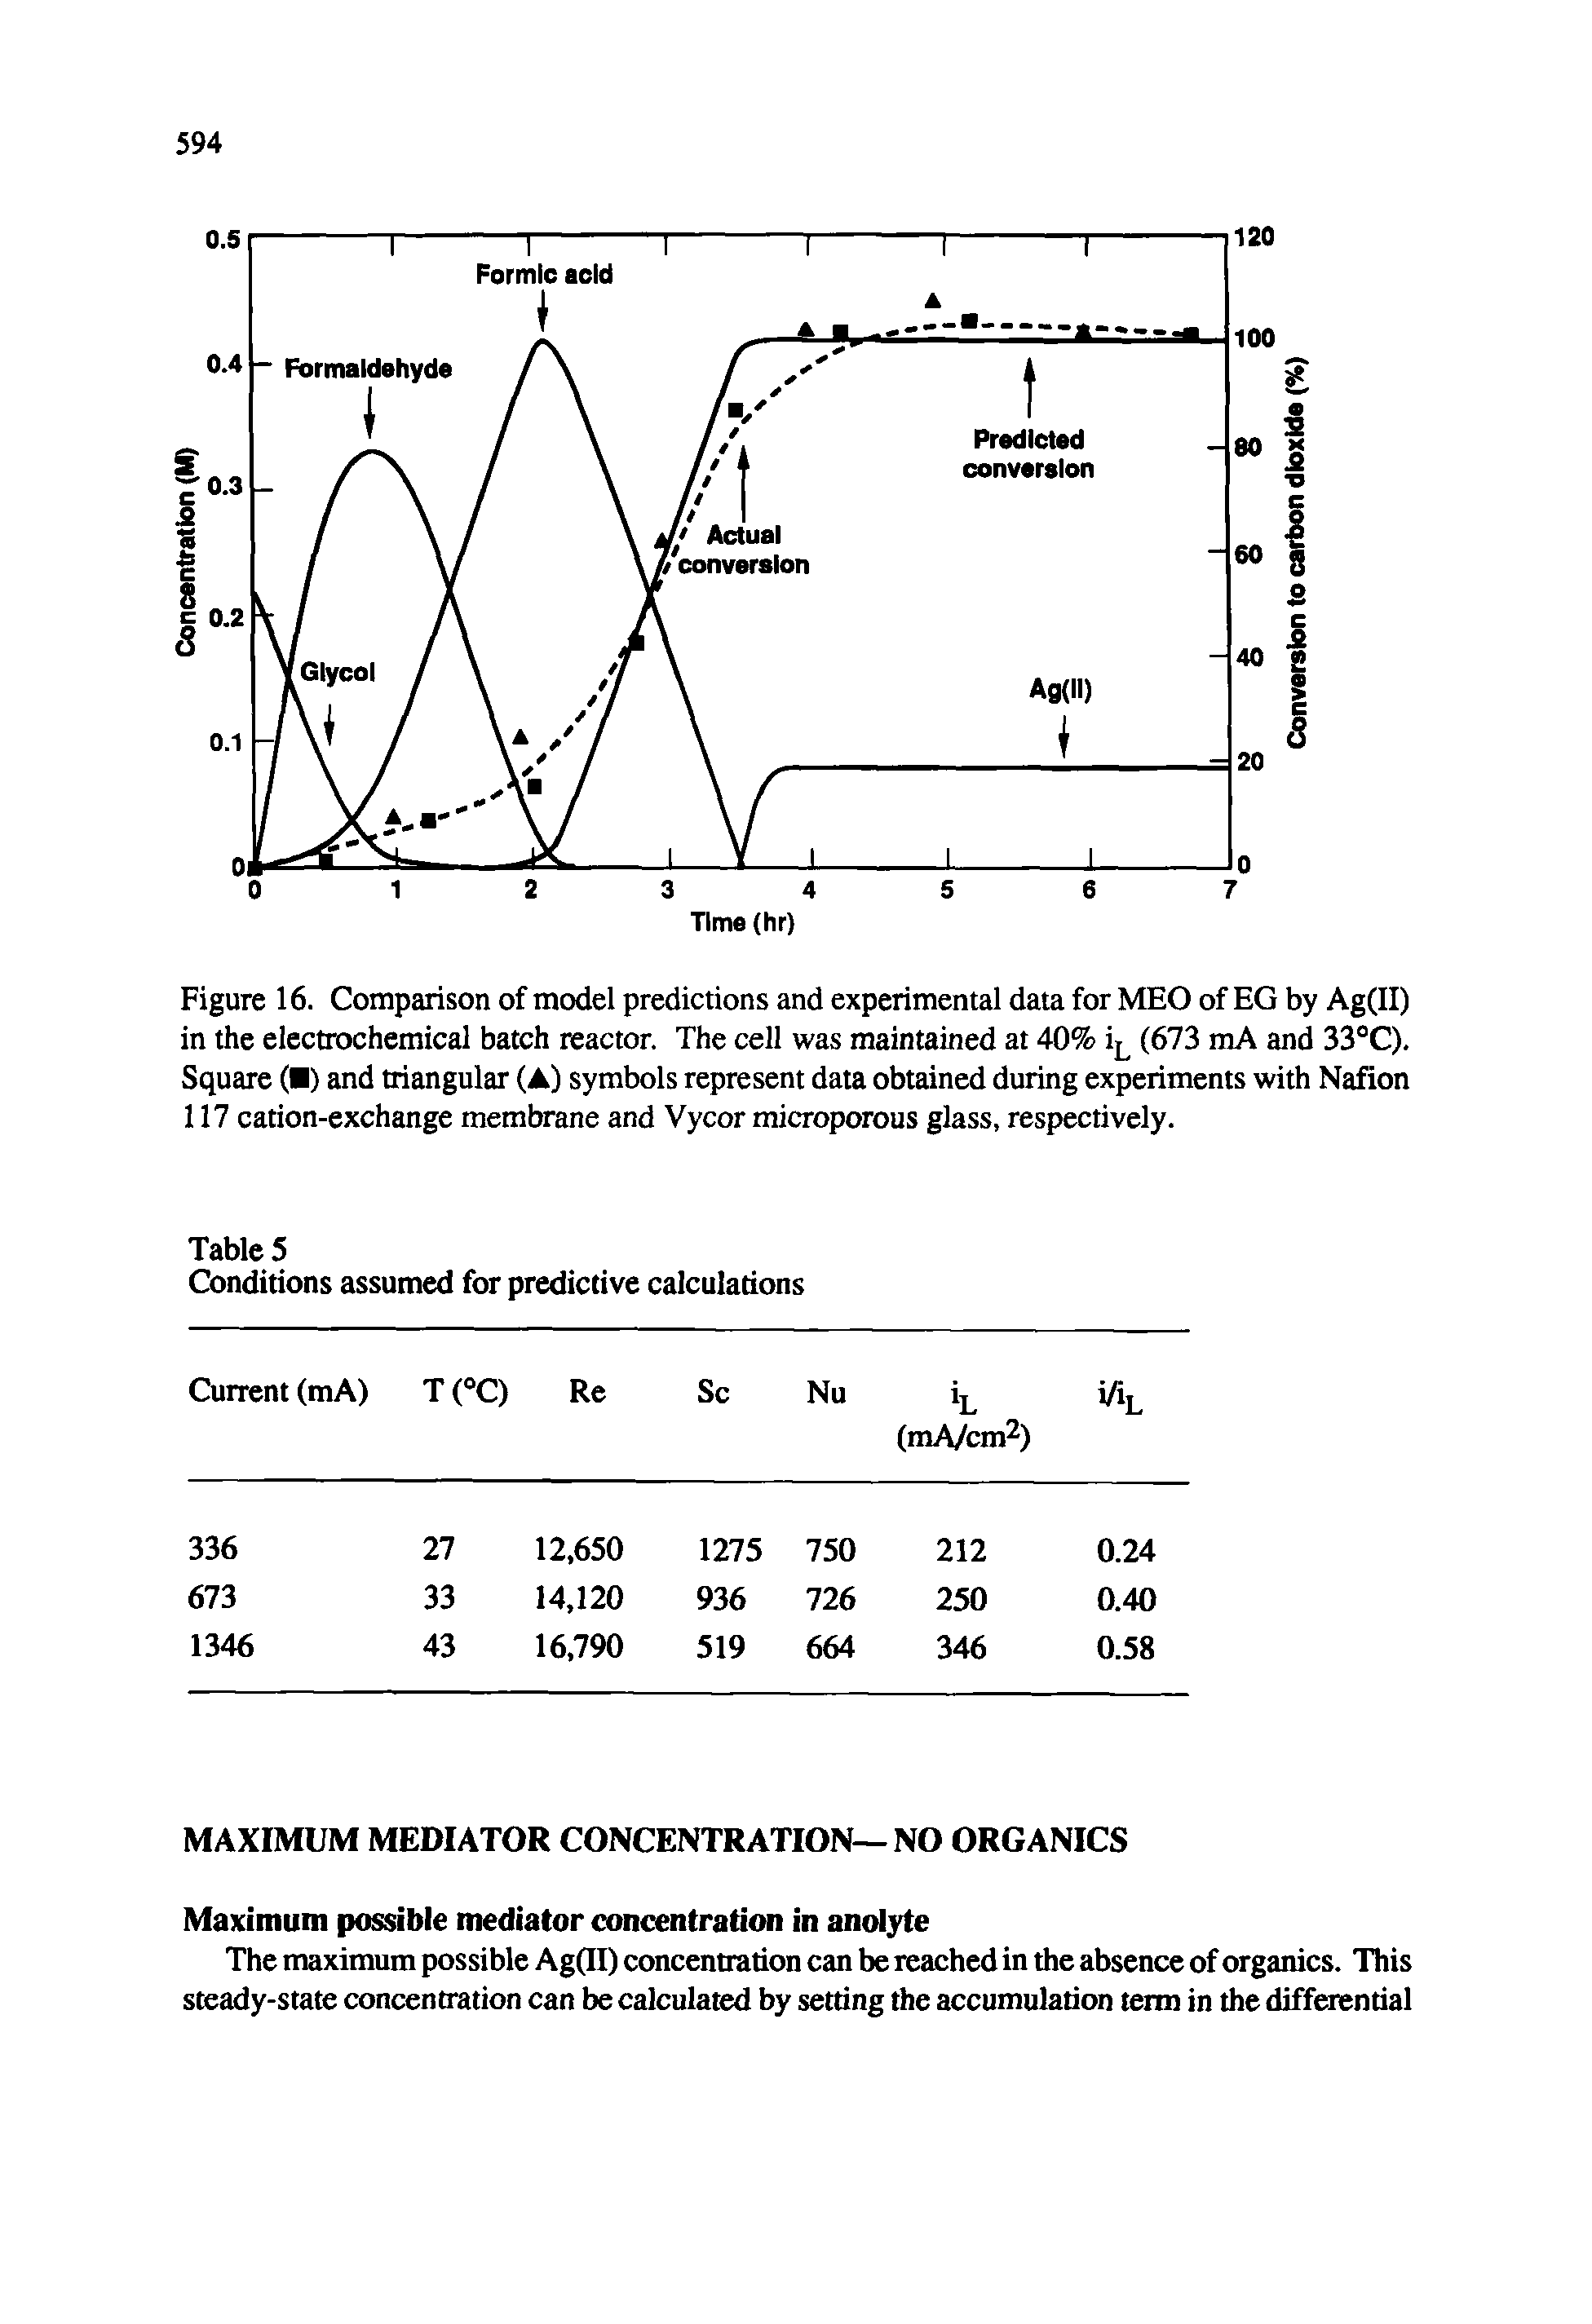 Figure 16. Comparison of model predictions and experimental data for MEO of EG by Ag(II) in the electrochemical batch reactor. The cell was maintained at 40% i (673 mA and 33°C). Square ( ) and triangular (A) symbols represent data obtained during experiments with Nafion 117 cation-exchange membrane and Vycor microporous glass, respectively.